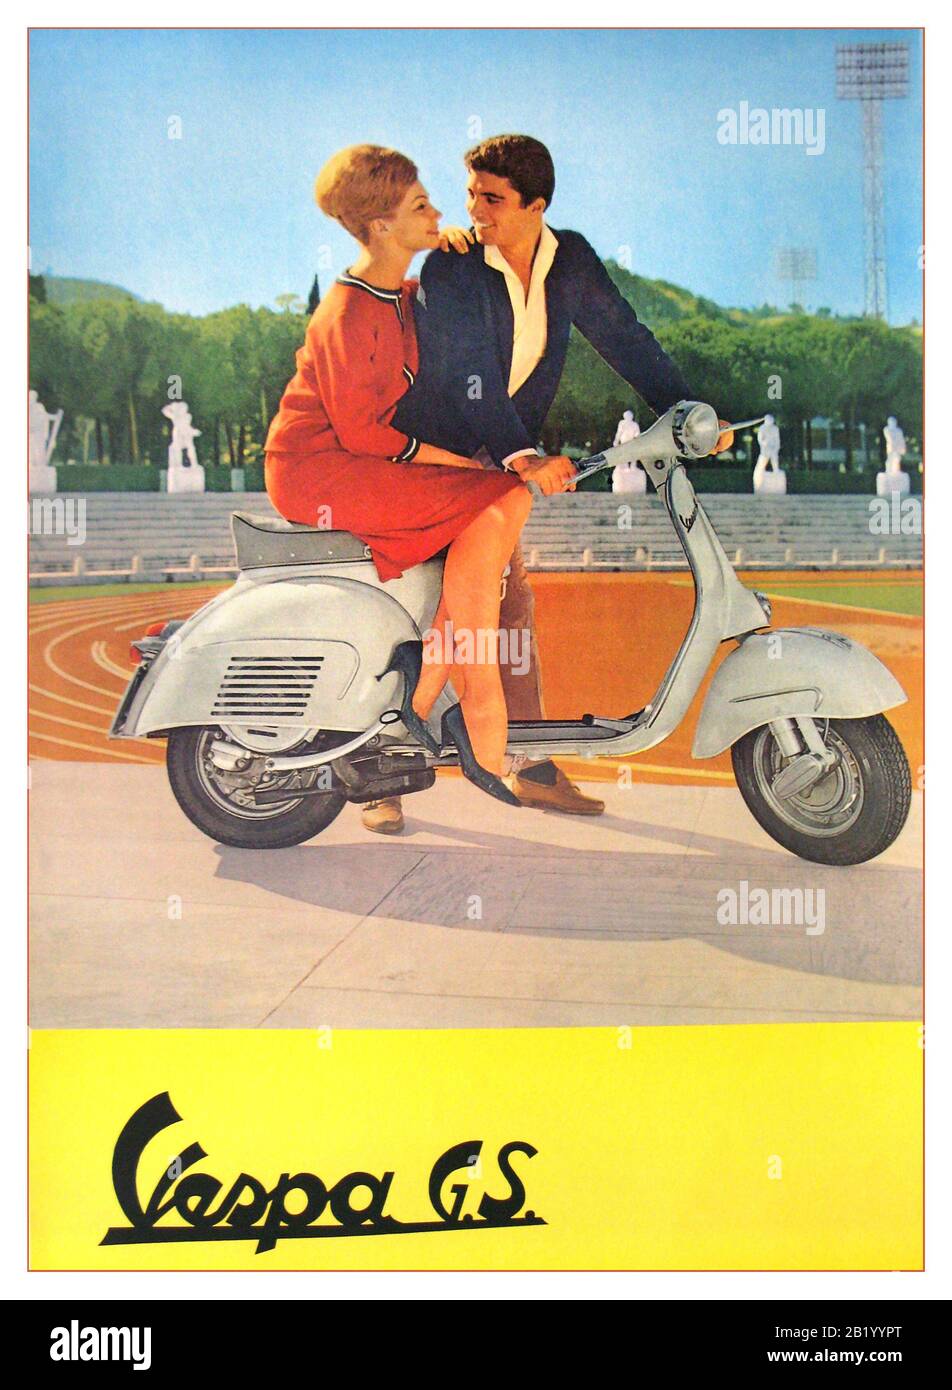 VESPA SCOOTER 1955 Vintage Advertisement featuring stylish couple on legendary Vespa GS 150 a milestone in the history of the scooter, not only for Vespa but for the market as a whole. Probably the most iconic scooter ever produced and now highly sort after. In the '50s the market a changed and Vespa became a 1950’s fashion style symbol statement for young people to distinguish themselves. For the first time a vehicle for the mass market was created with a quieter engine and performance. The Vespa 150 GS 1955 Stock Photo